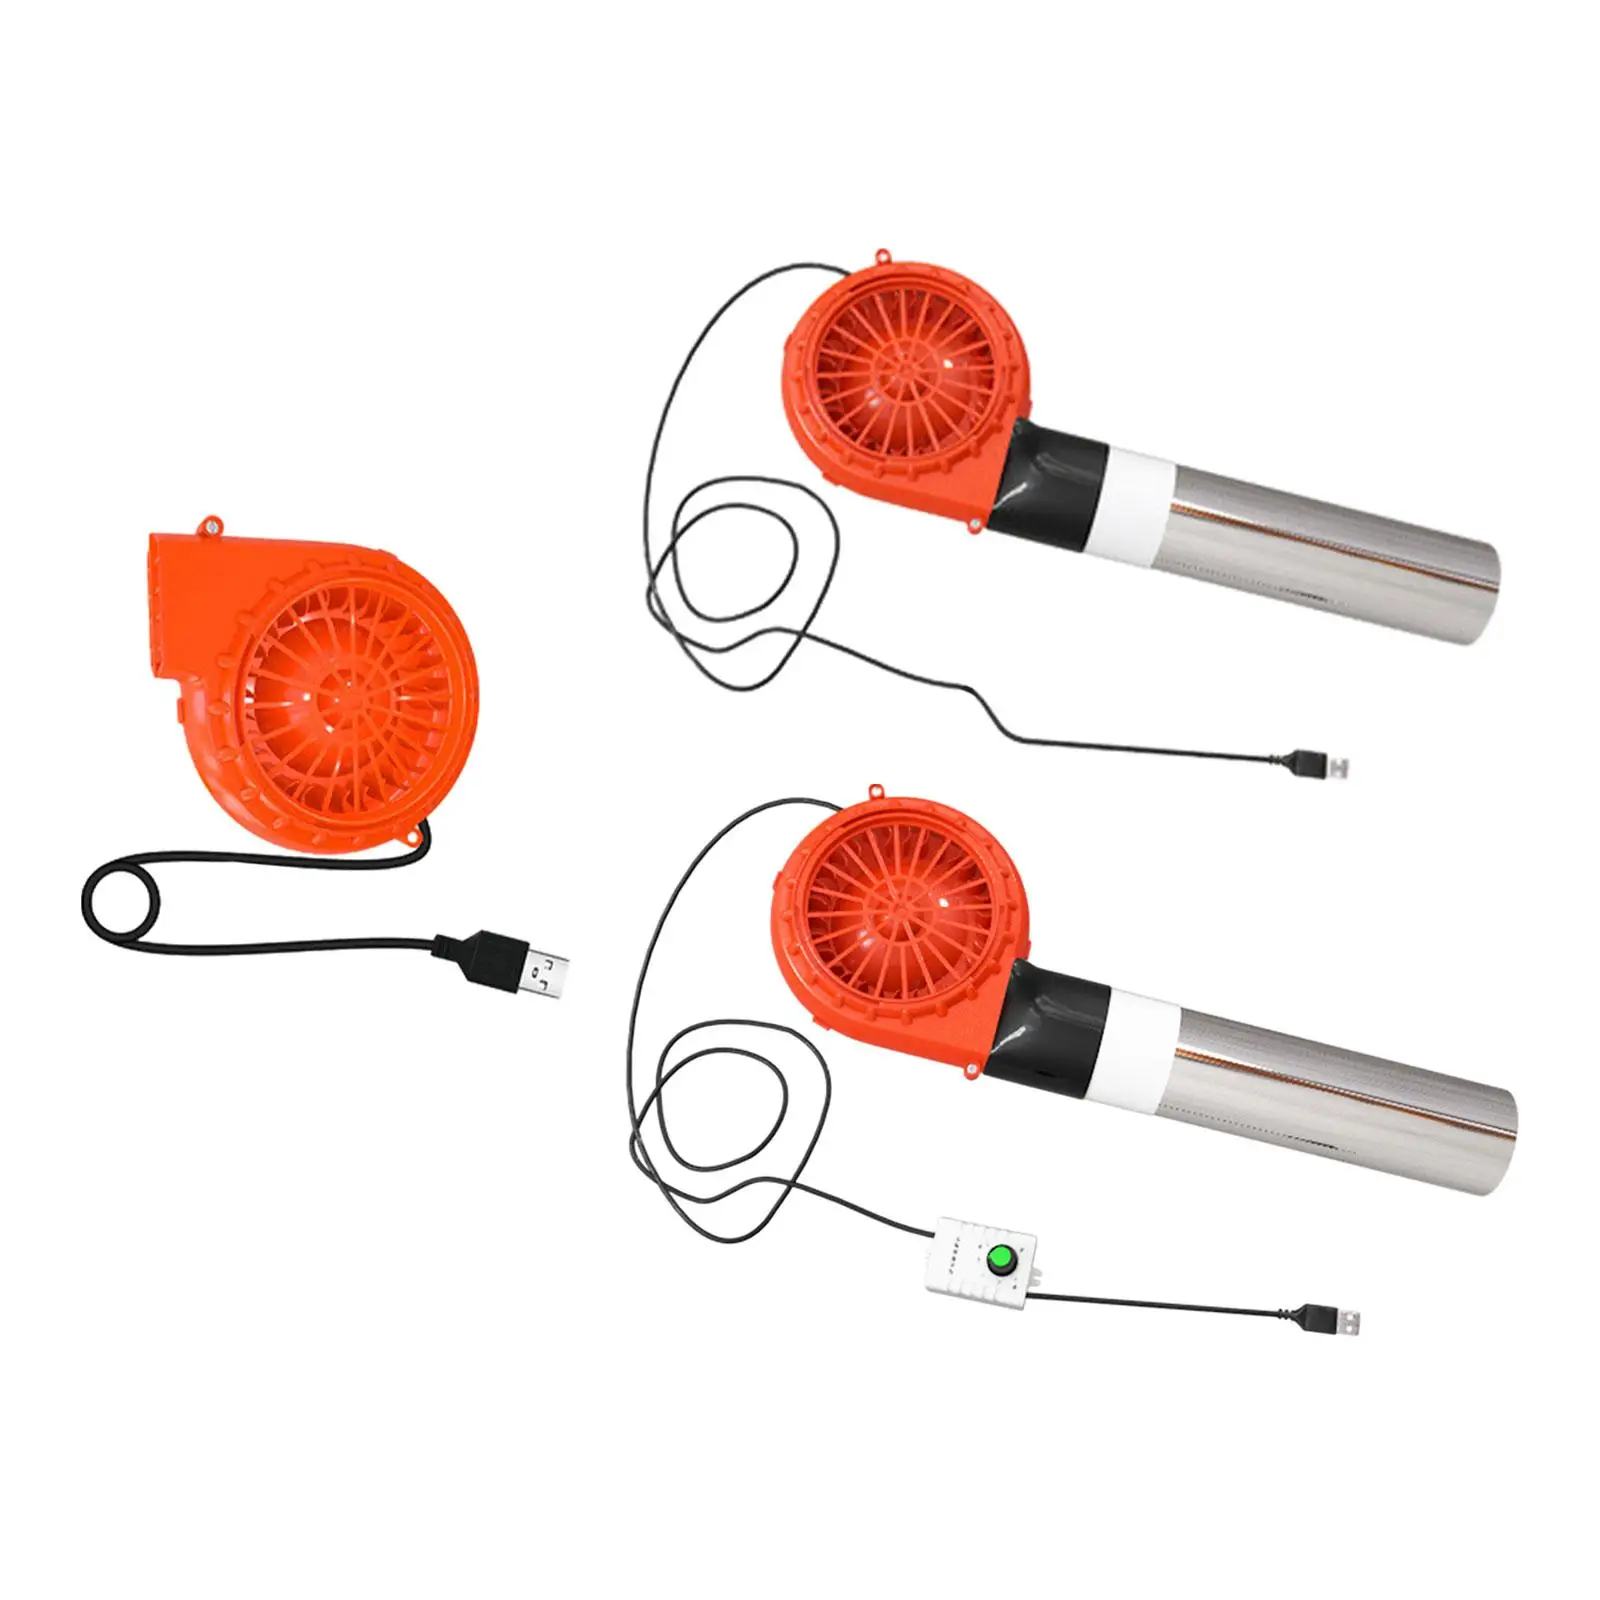 USB BBQ Air Blower, Barbecue Air Blower, Handheld, Small, Compact Grill Cooking Fan, Electric Blower for Picnic